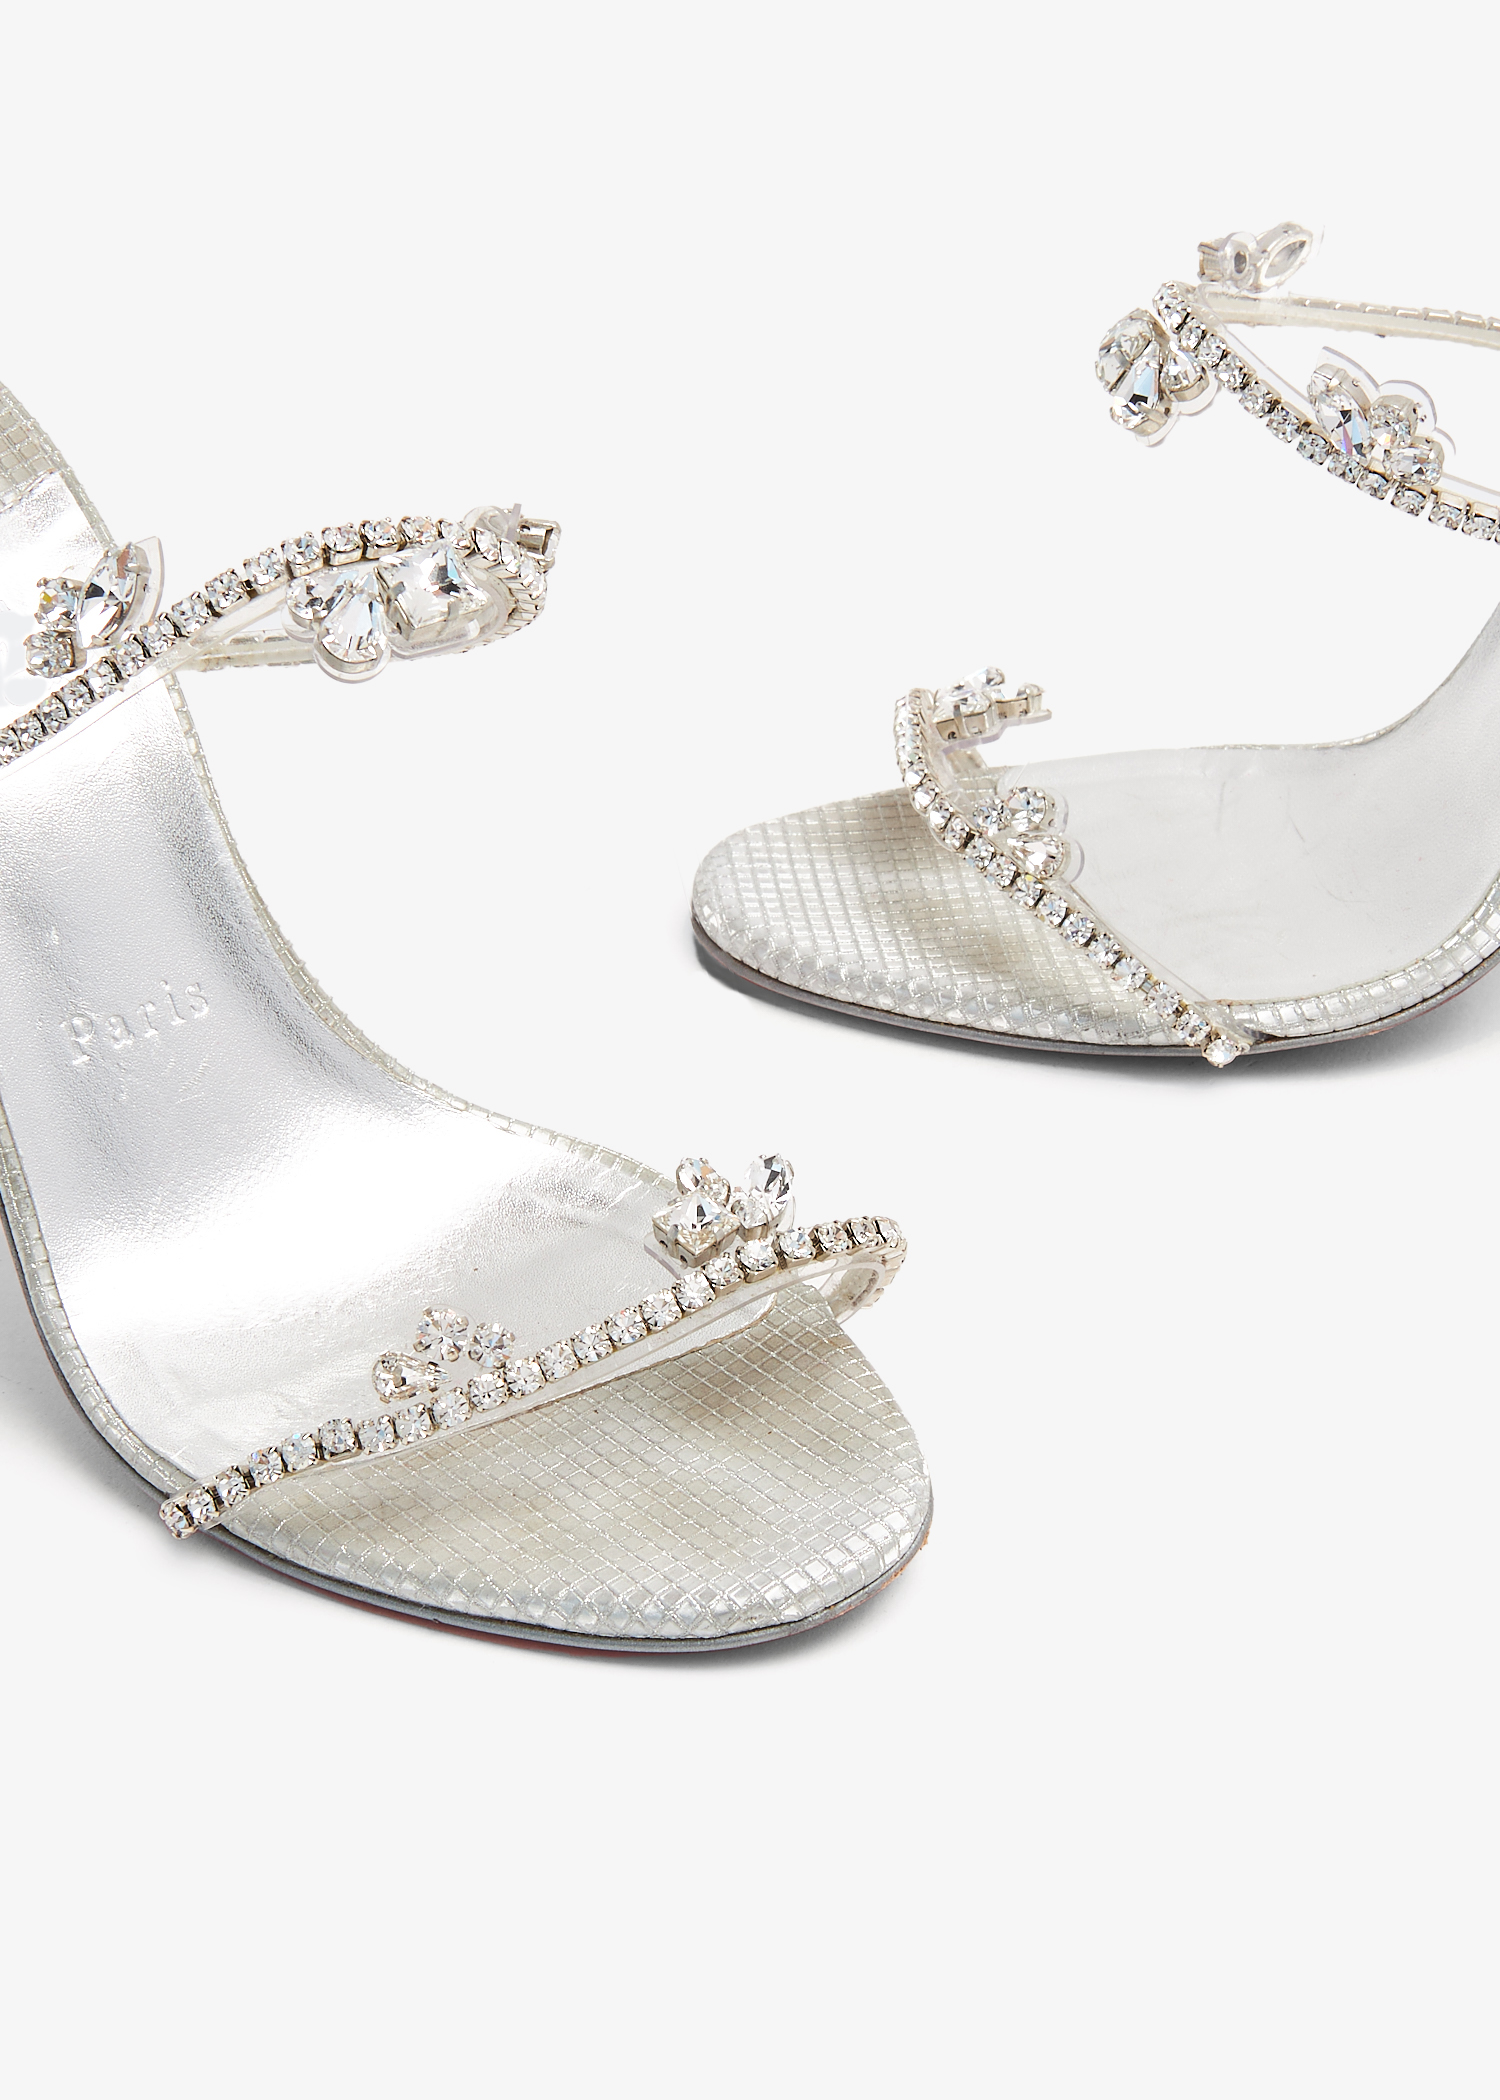 Christian Louboutin Women's Just Queen 100 Embellished Sandals - Silver - Size 7